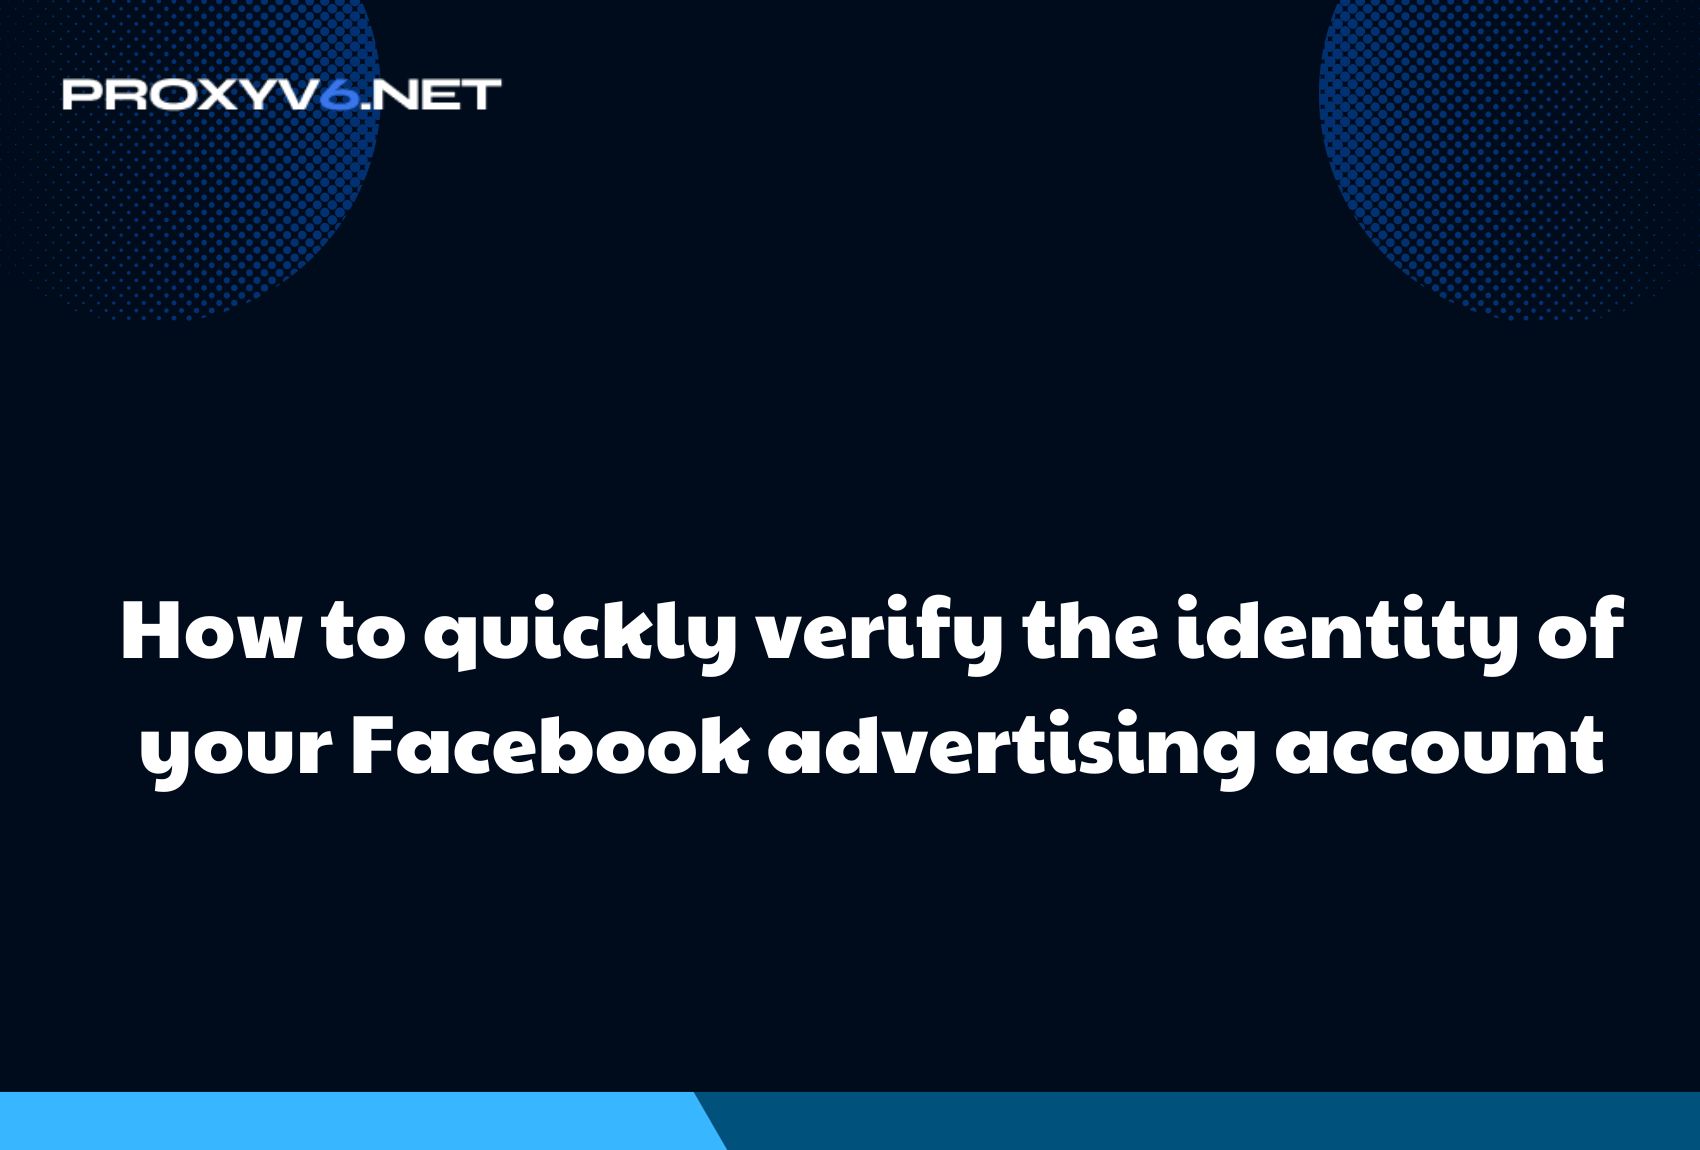 How to quickly verify the identity of your Facebook advertising account